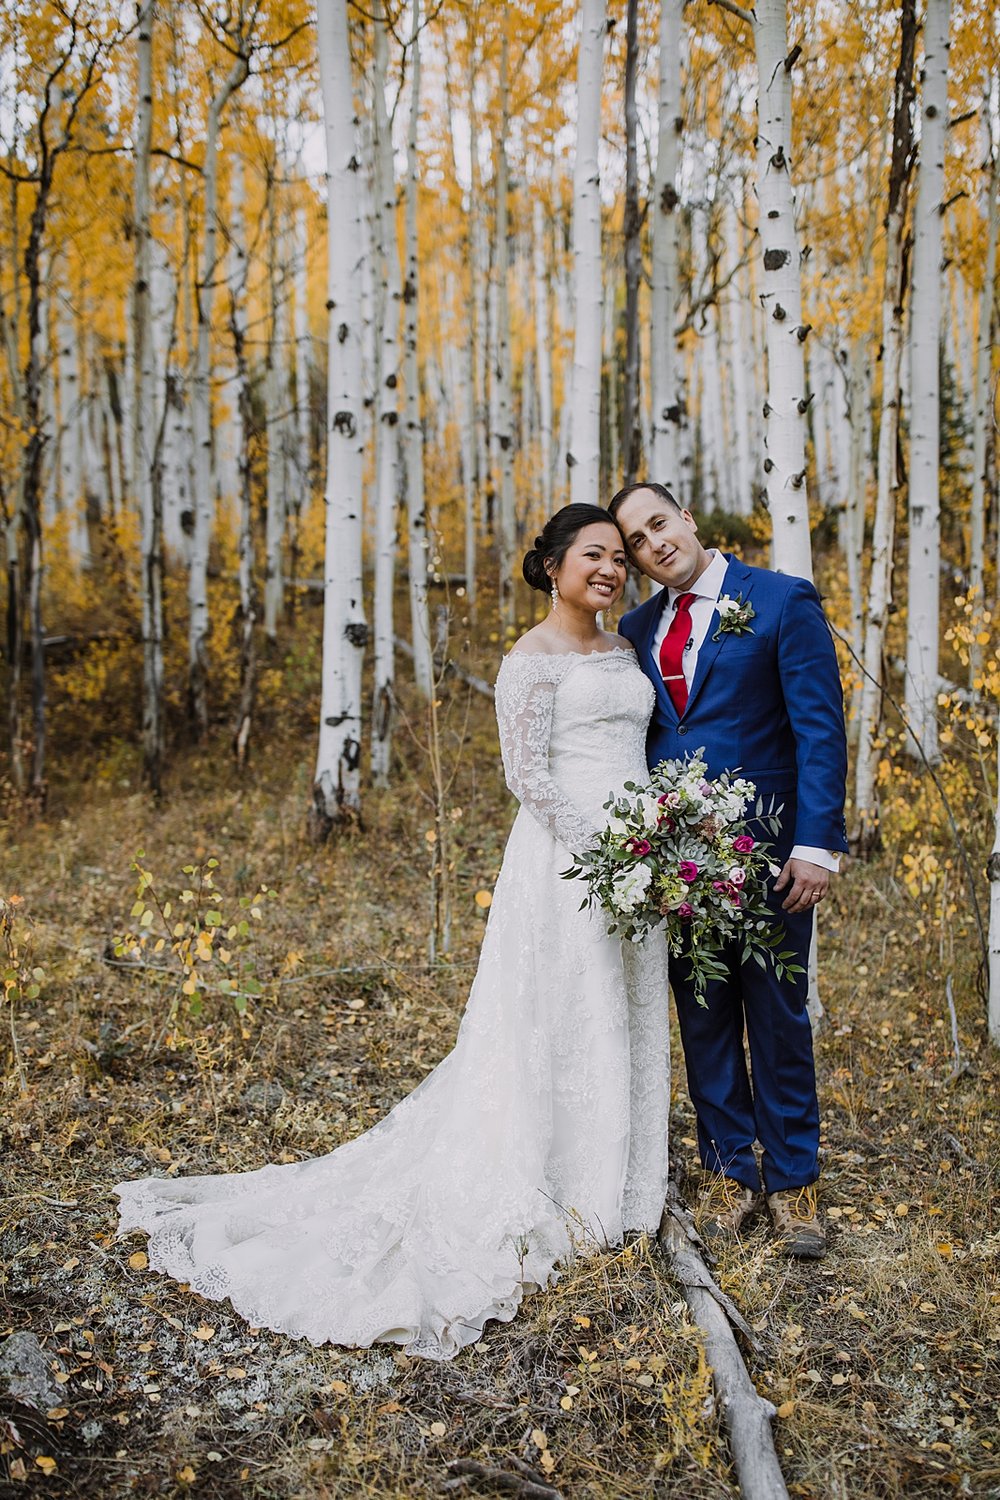 elopement ceremony in an aspen grove, ames colorado elopement, alta lakes elopement, ophir colorado elopement, telluride colorado wedding, trout lake elopement, priest lake elopement